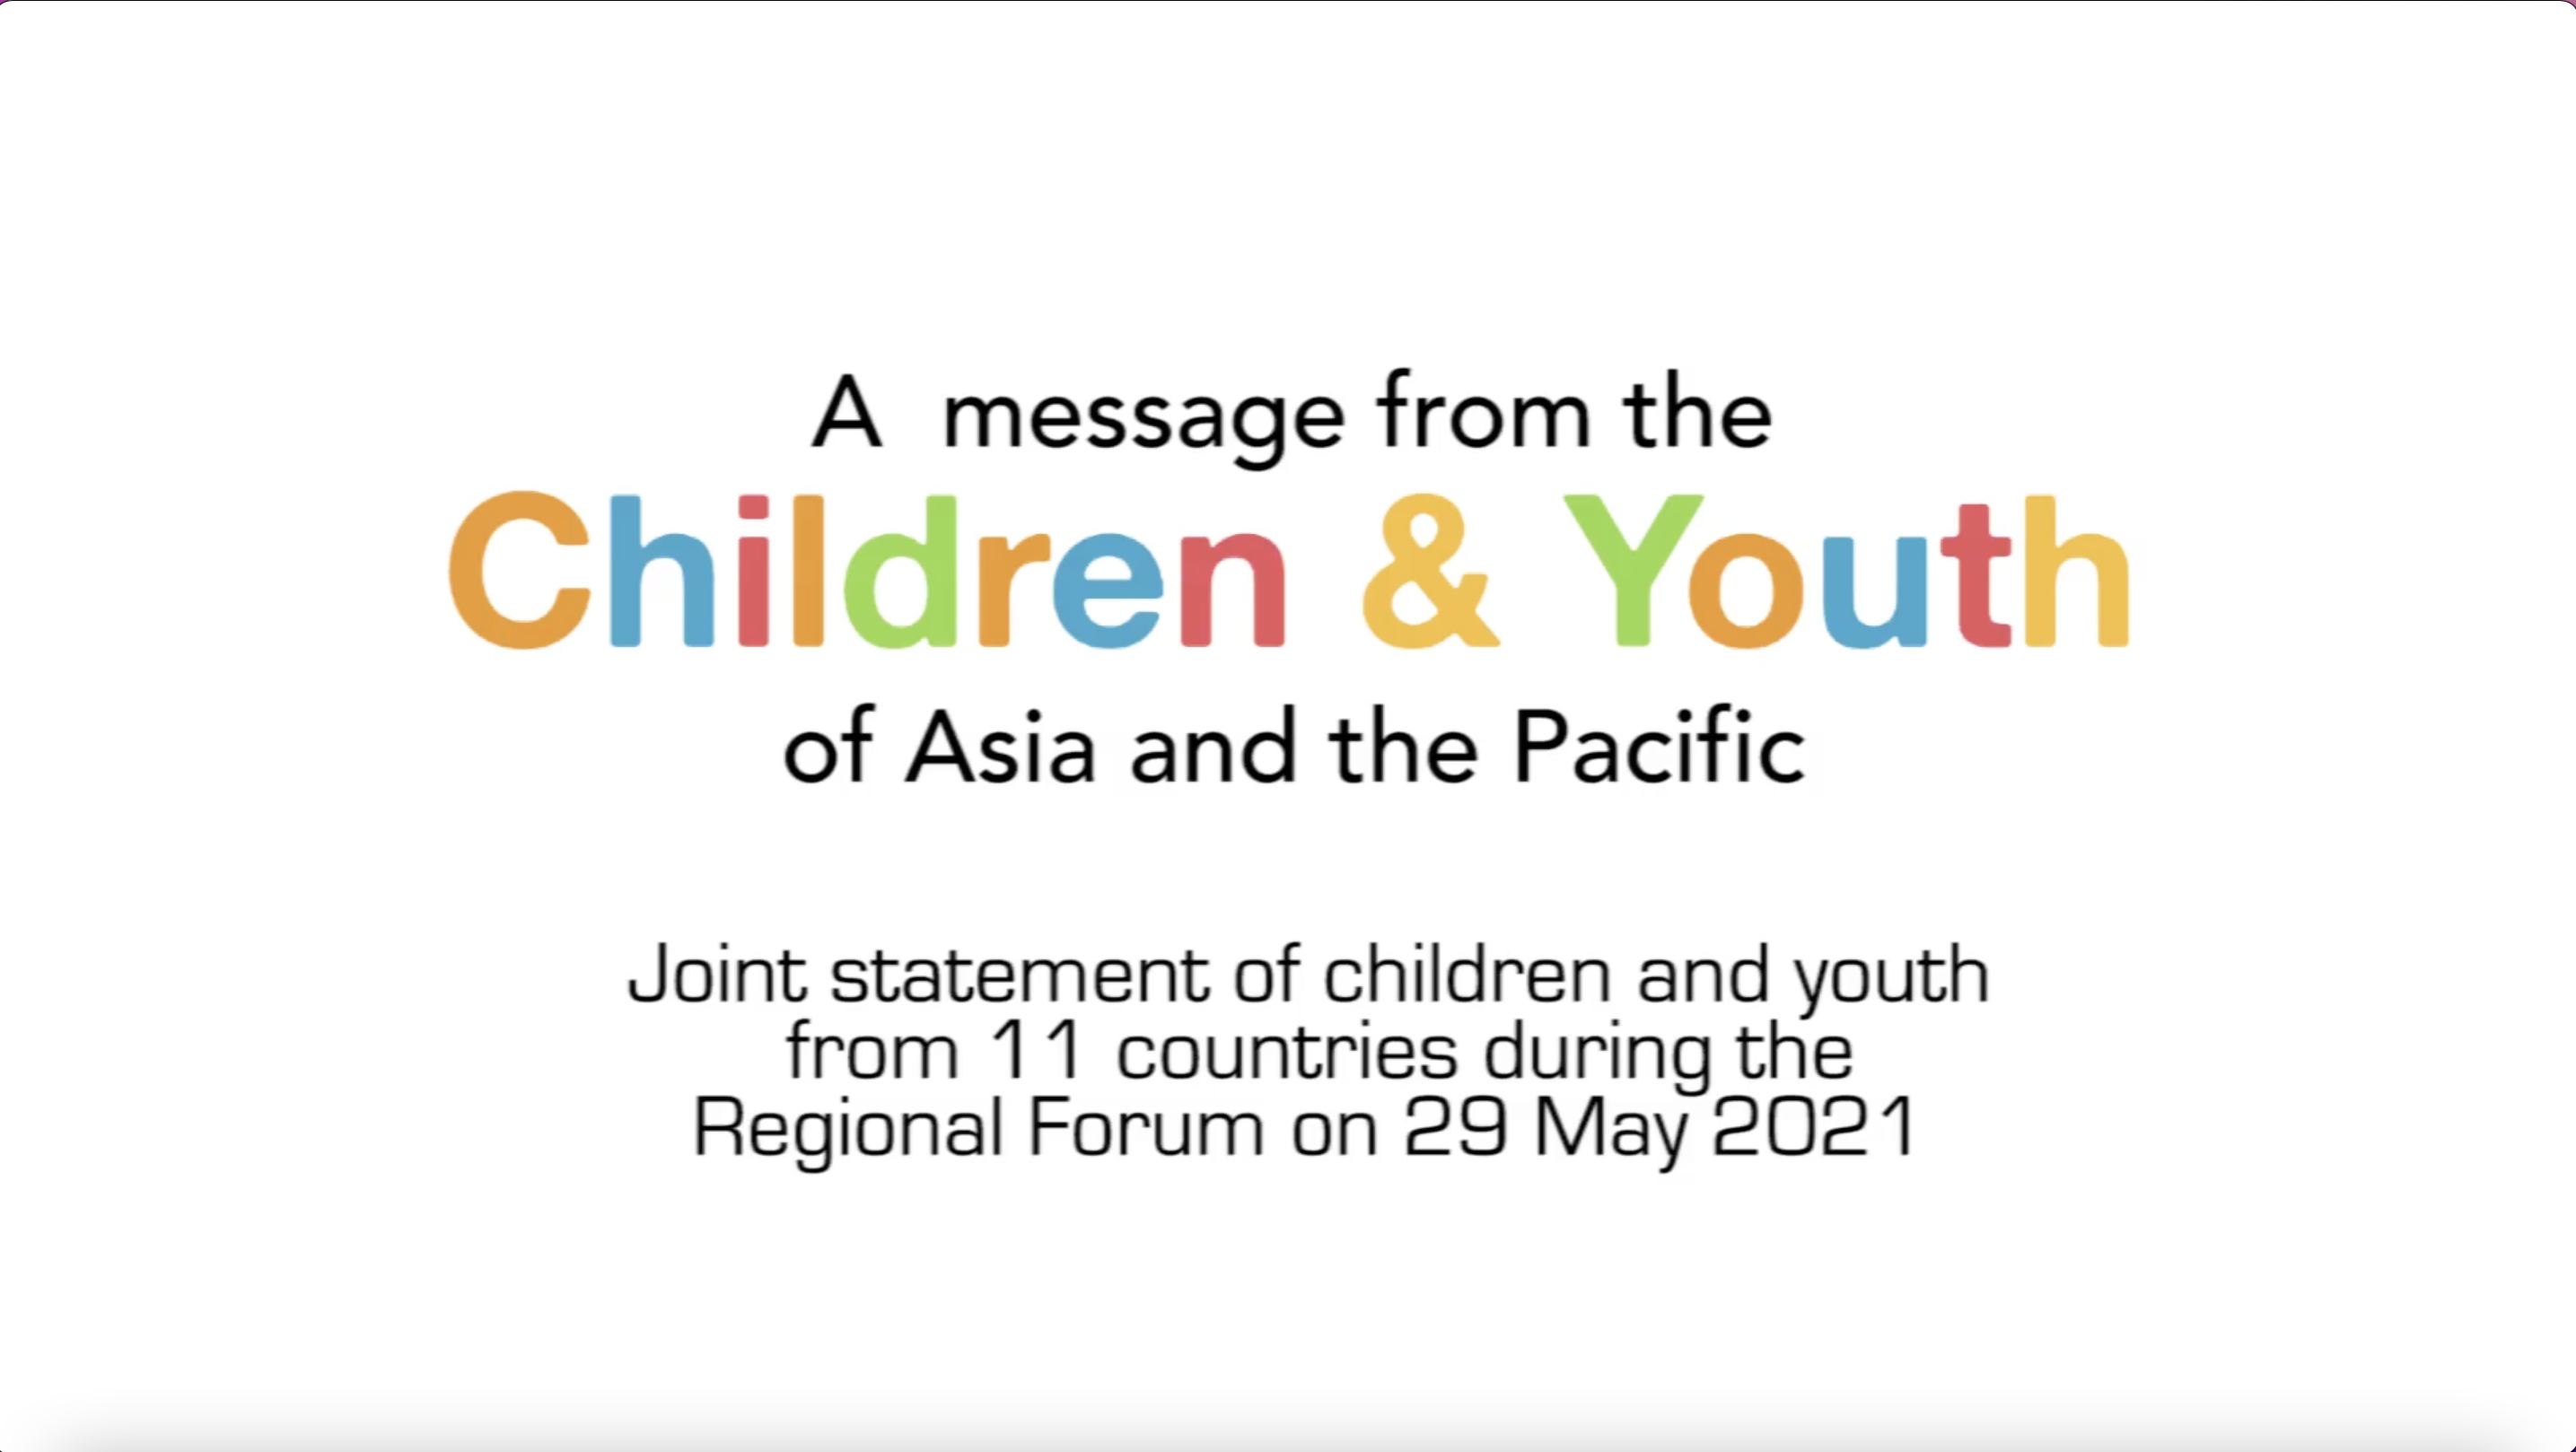 The voices of children and youth on CRVS in Asia and the Pacific